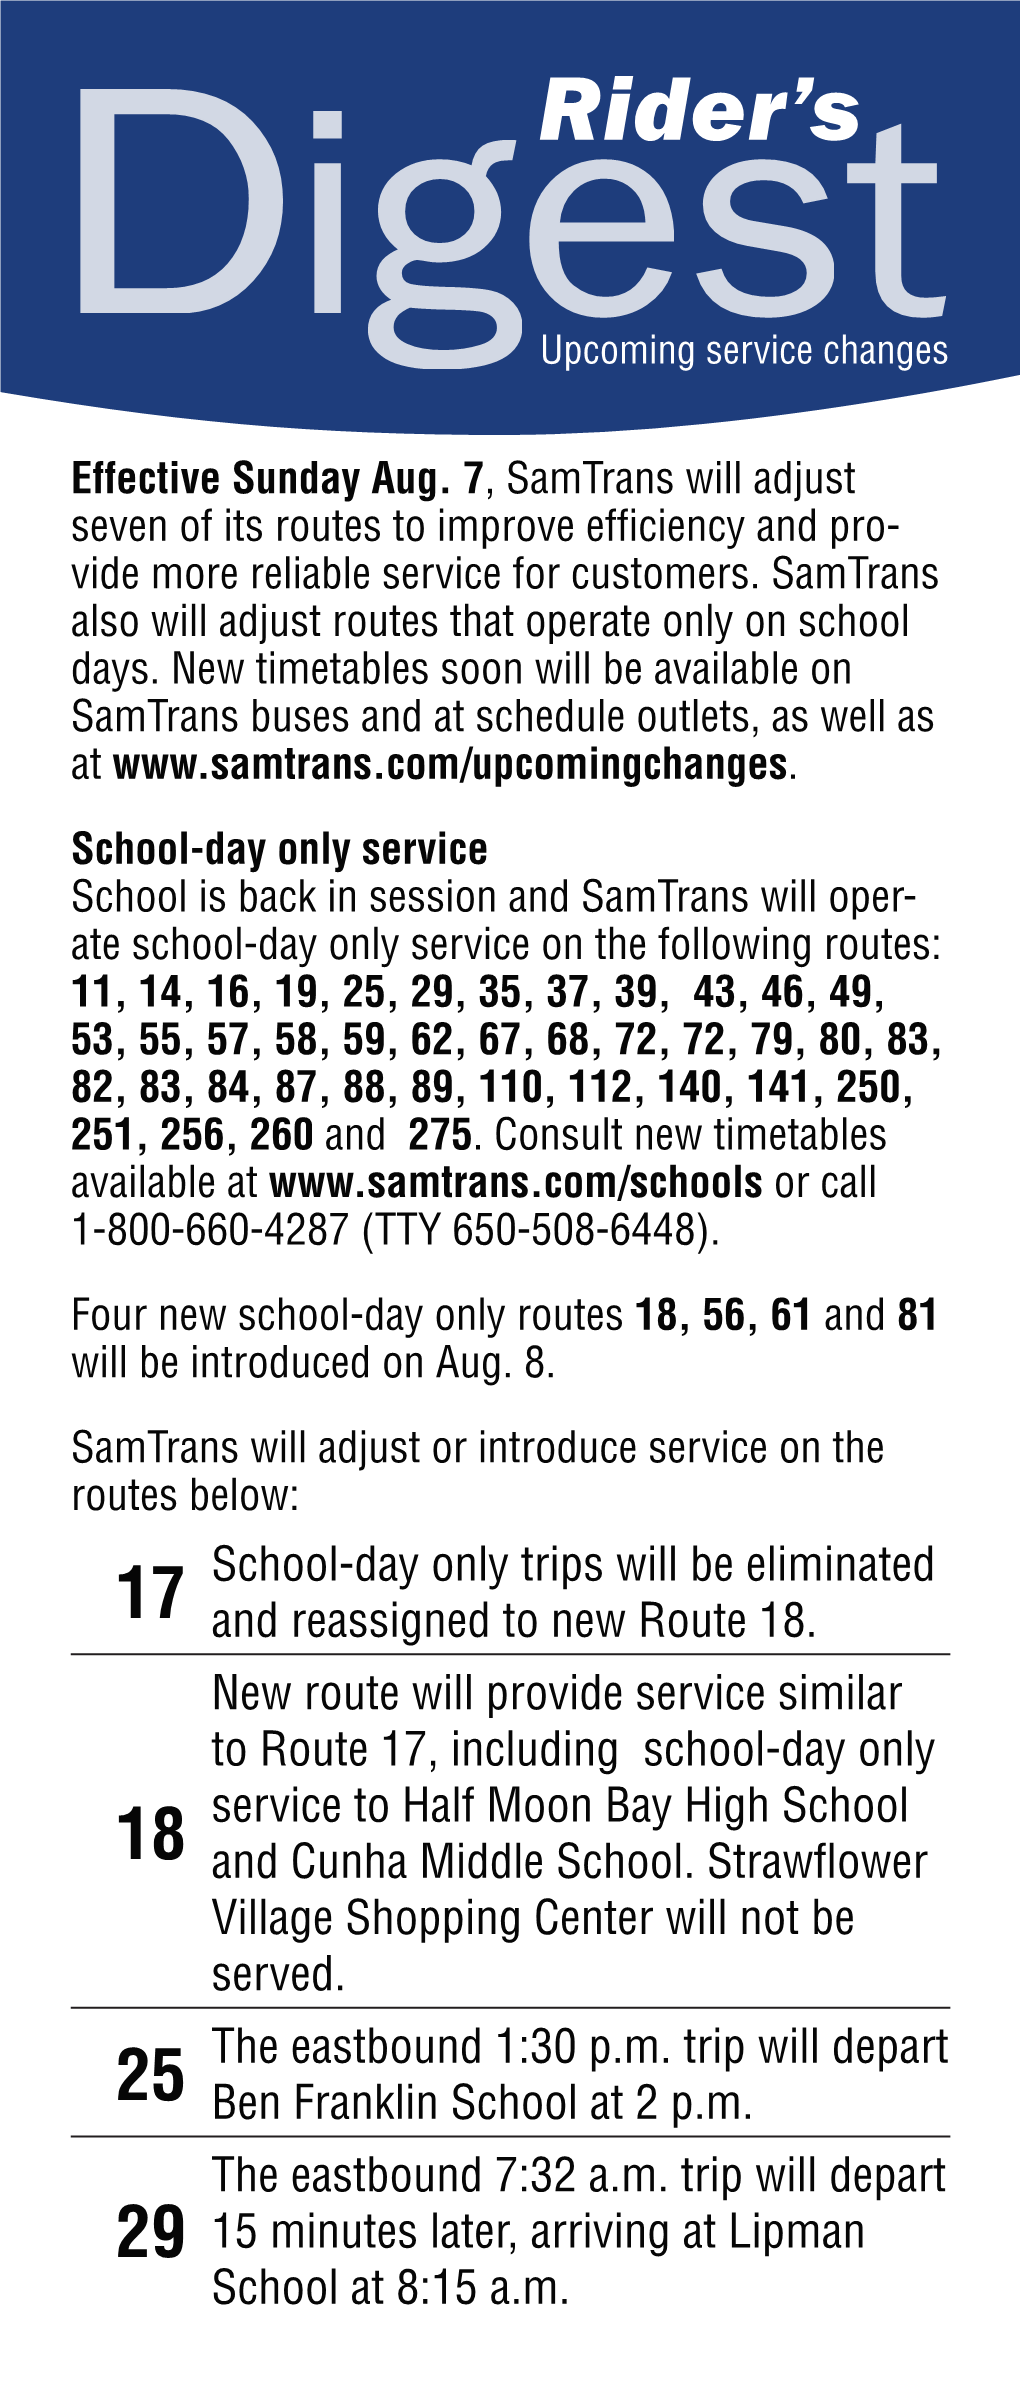 School-Day Only Trips Will Be Eliminated and Reassigned to New